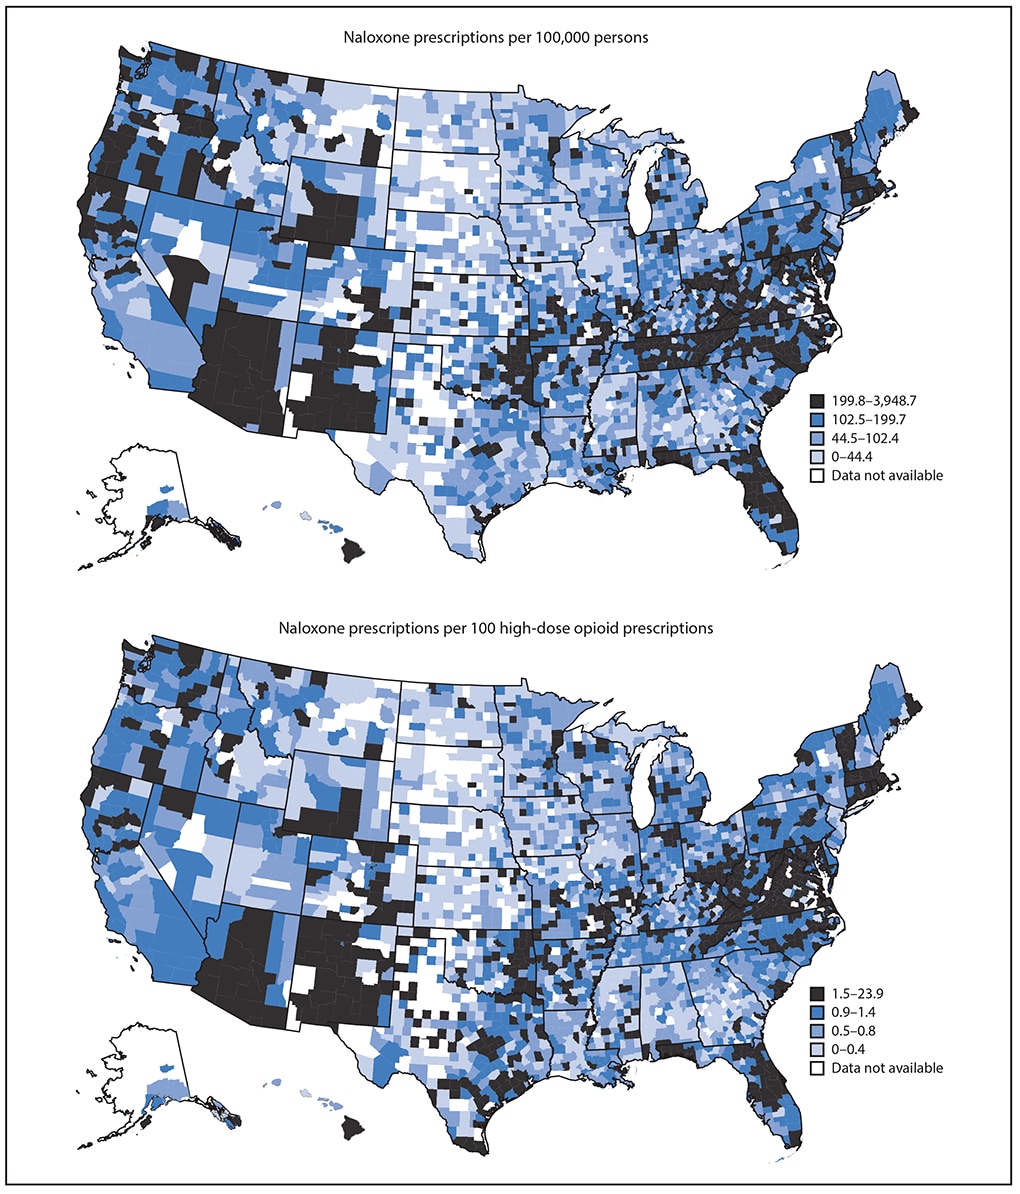 The figure consists of two maps of the United States, the first showing naloxone prescriptions per 100,000 persons, by county, and the second showing naloxone prescriptions per 100 high-dose opioid prescriptions, by county, during 2018.